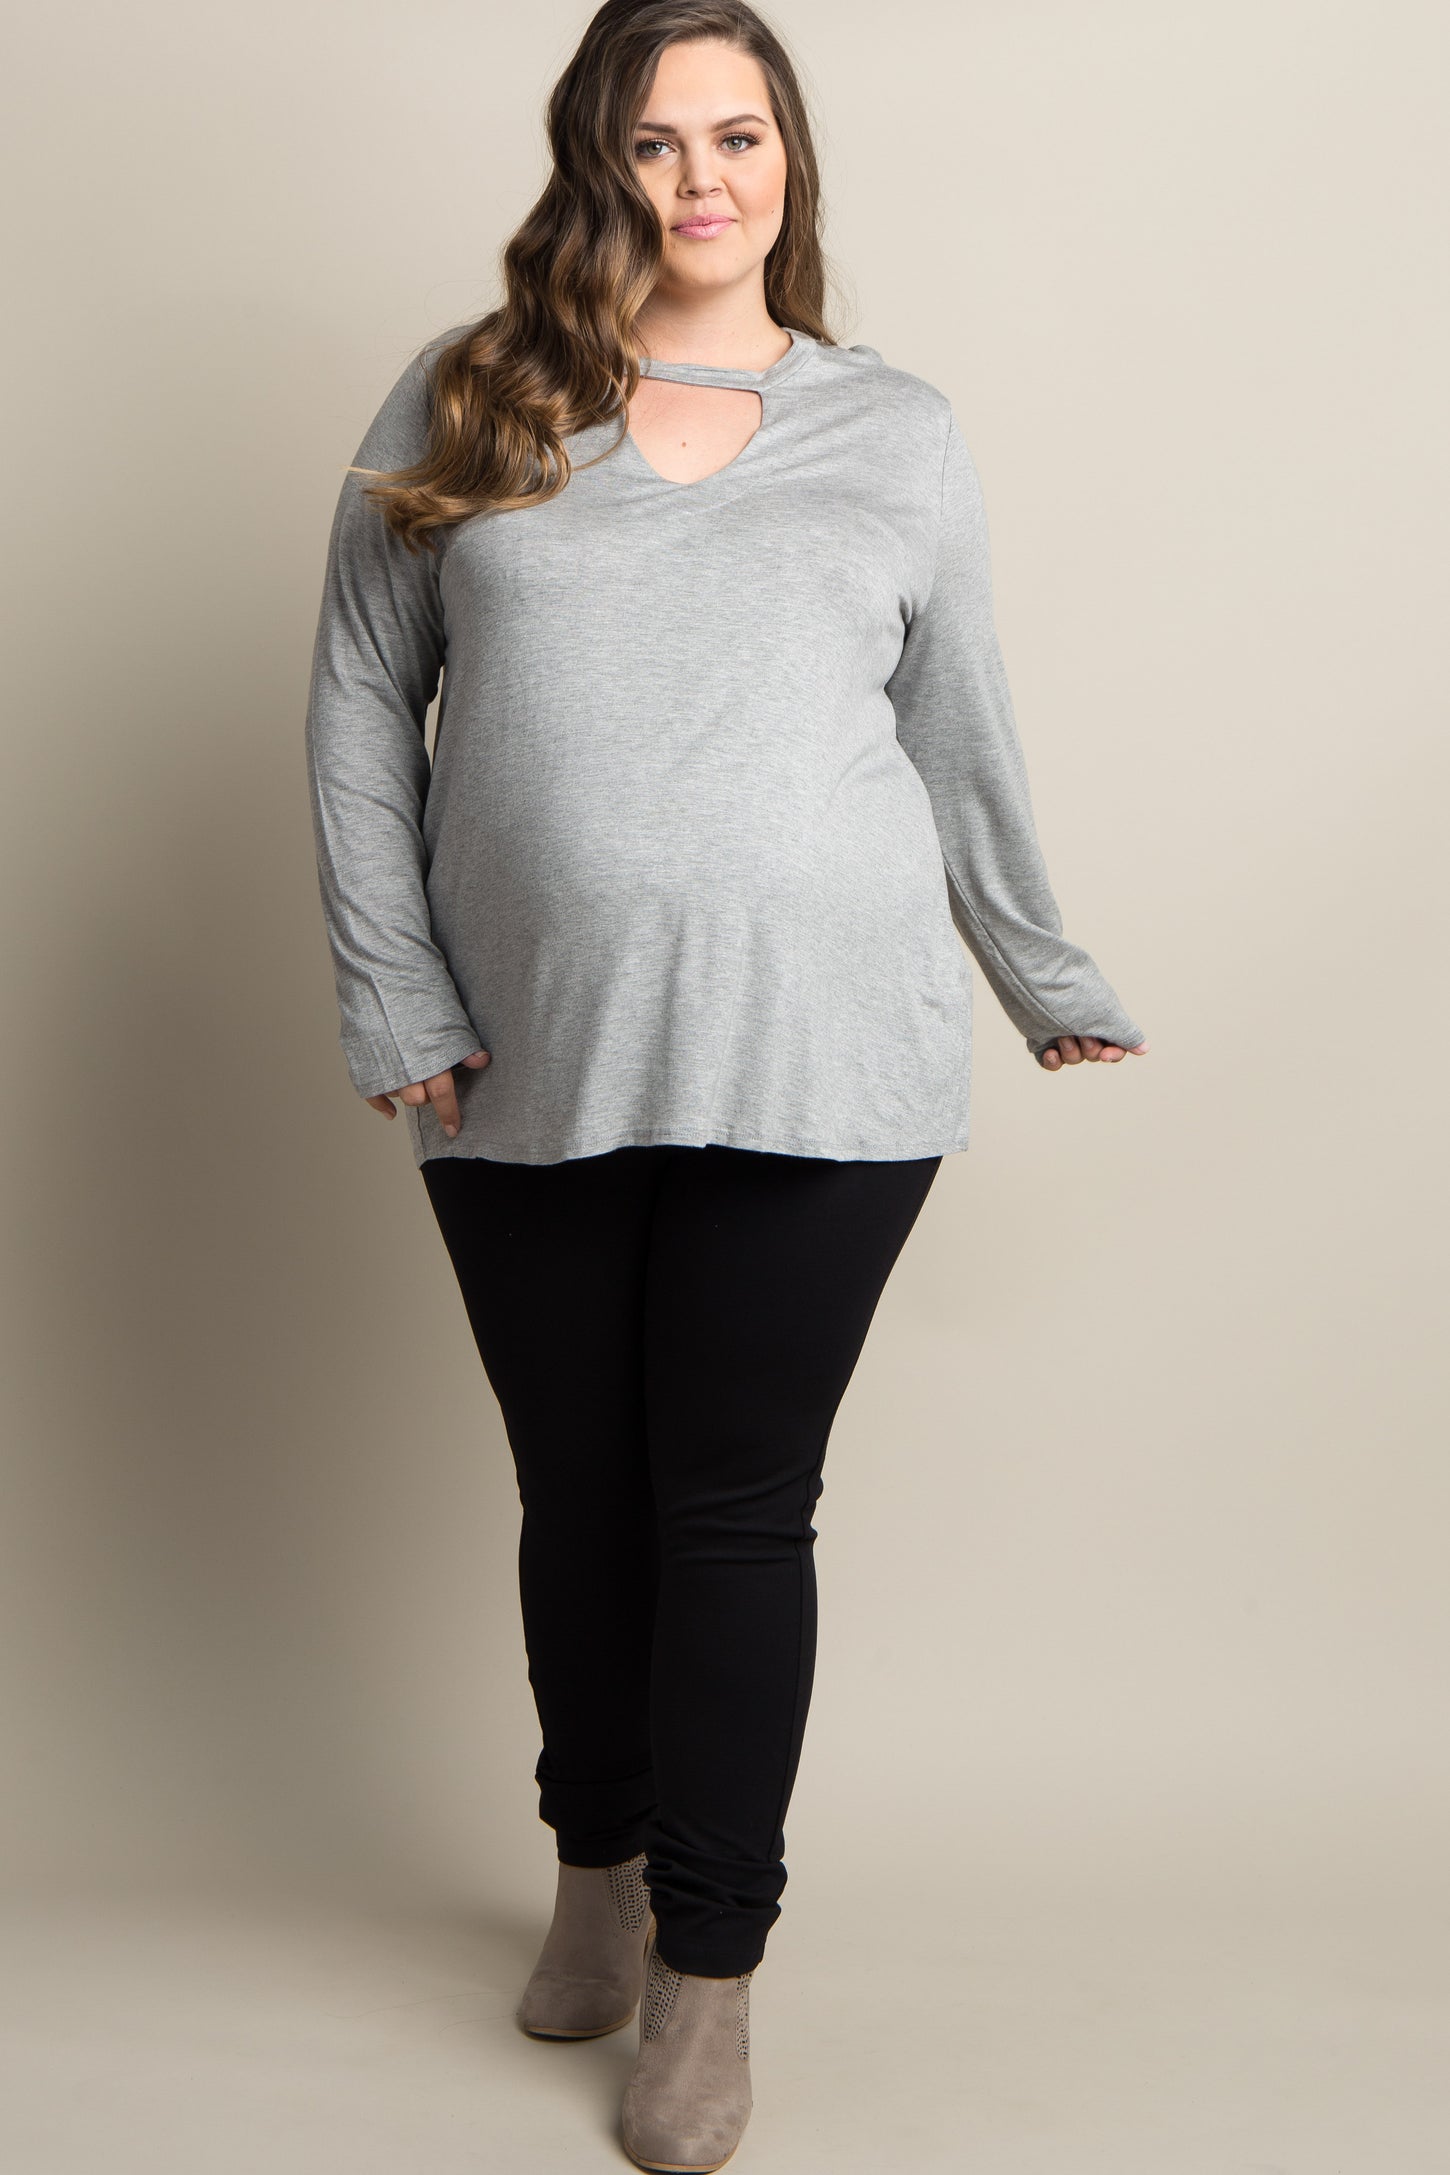 Heather Grey Solid Cutout Front Plus Maternity Top